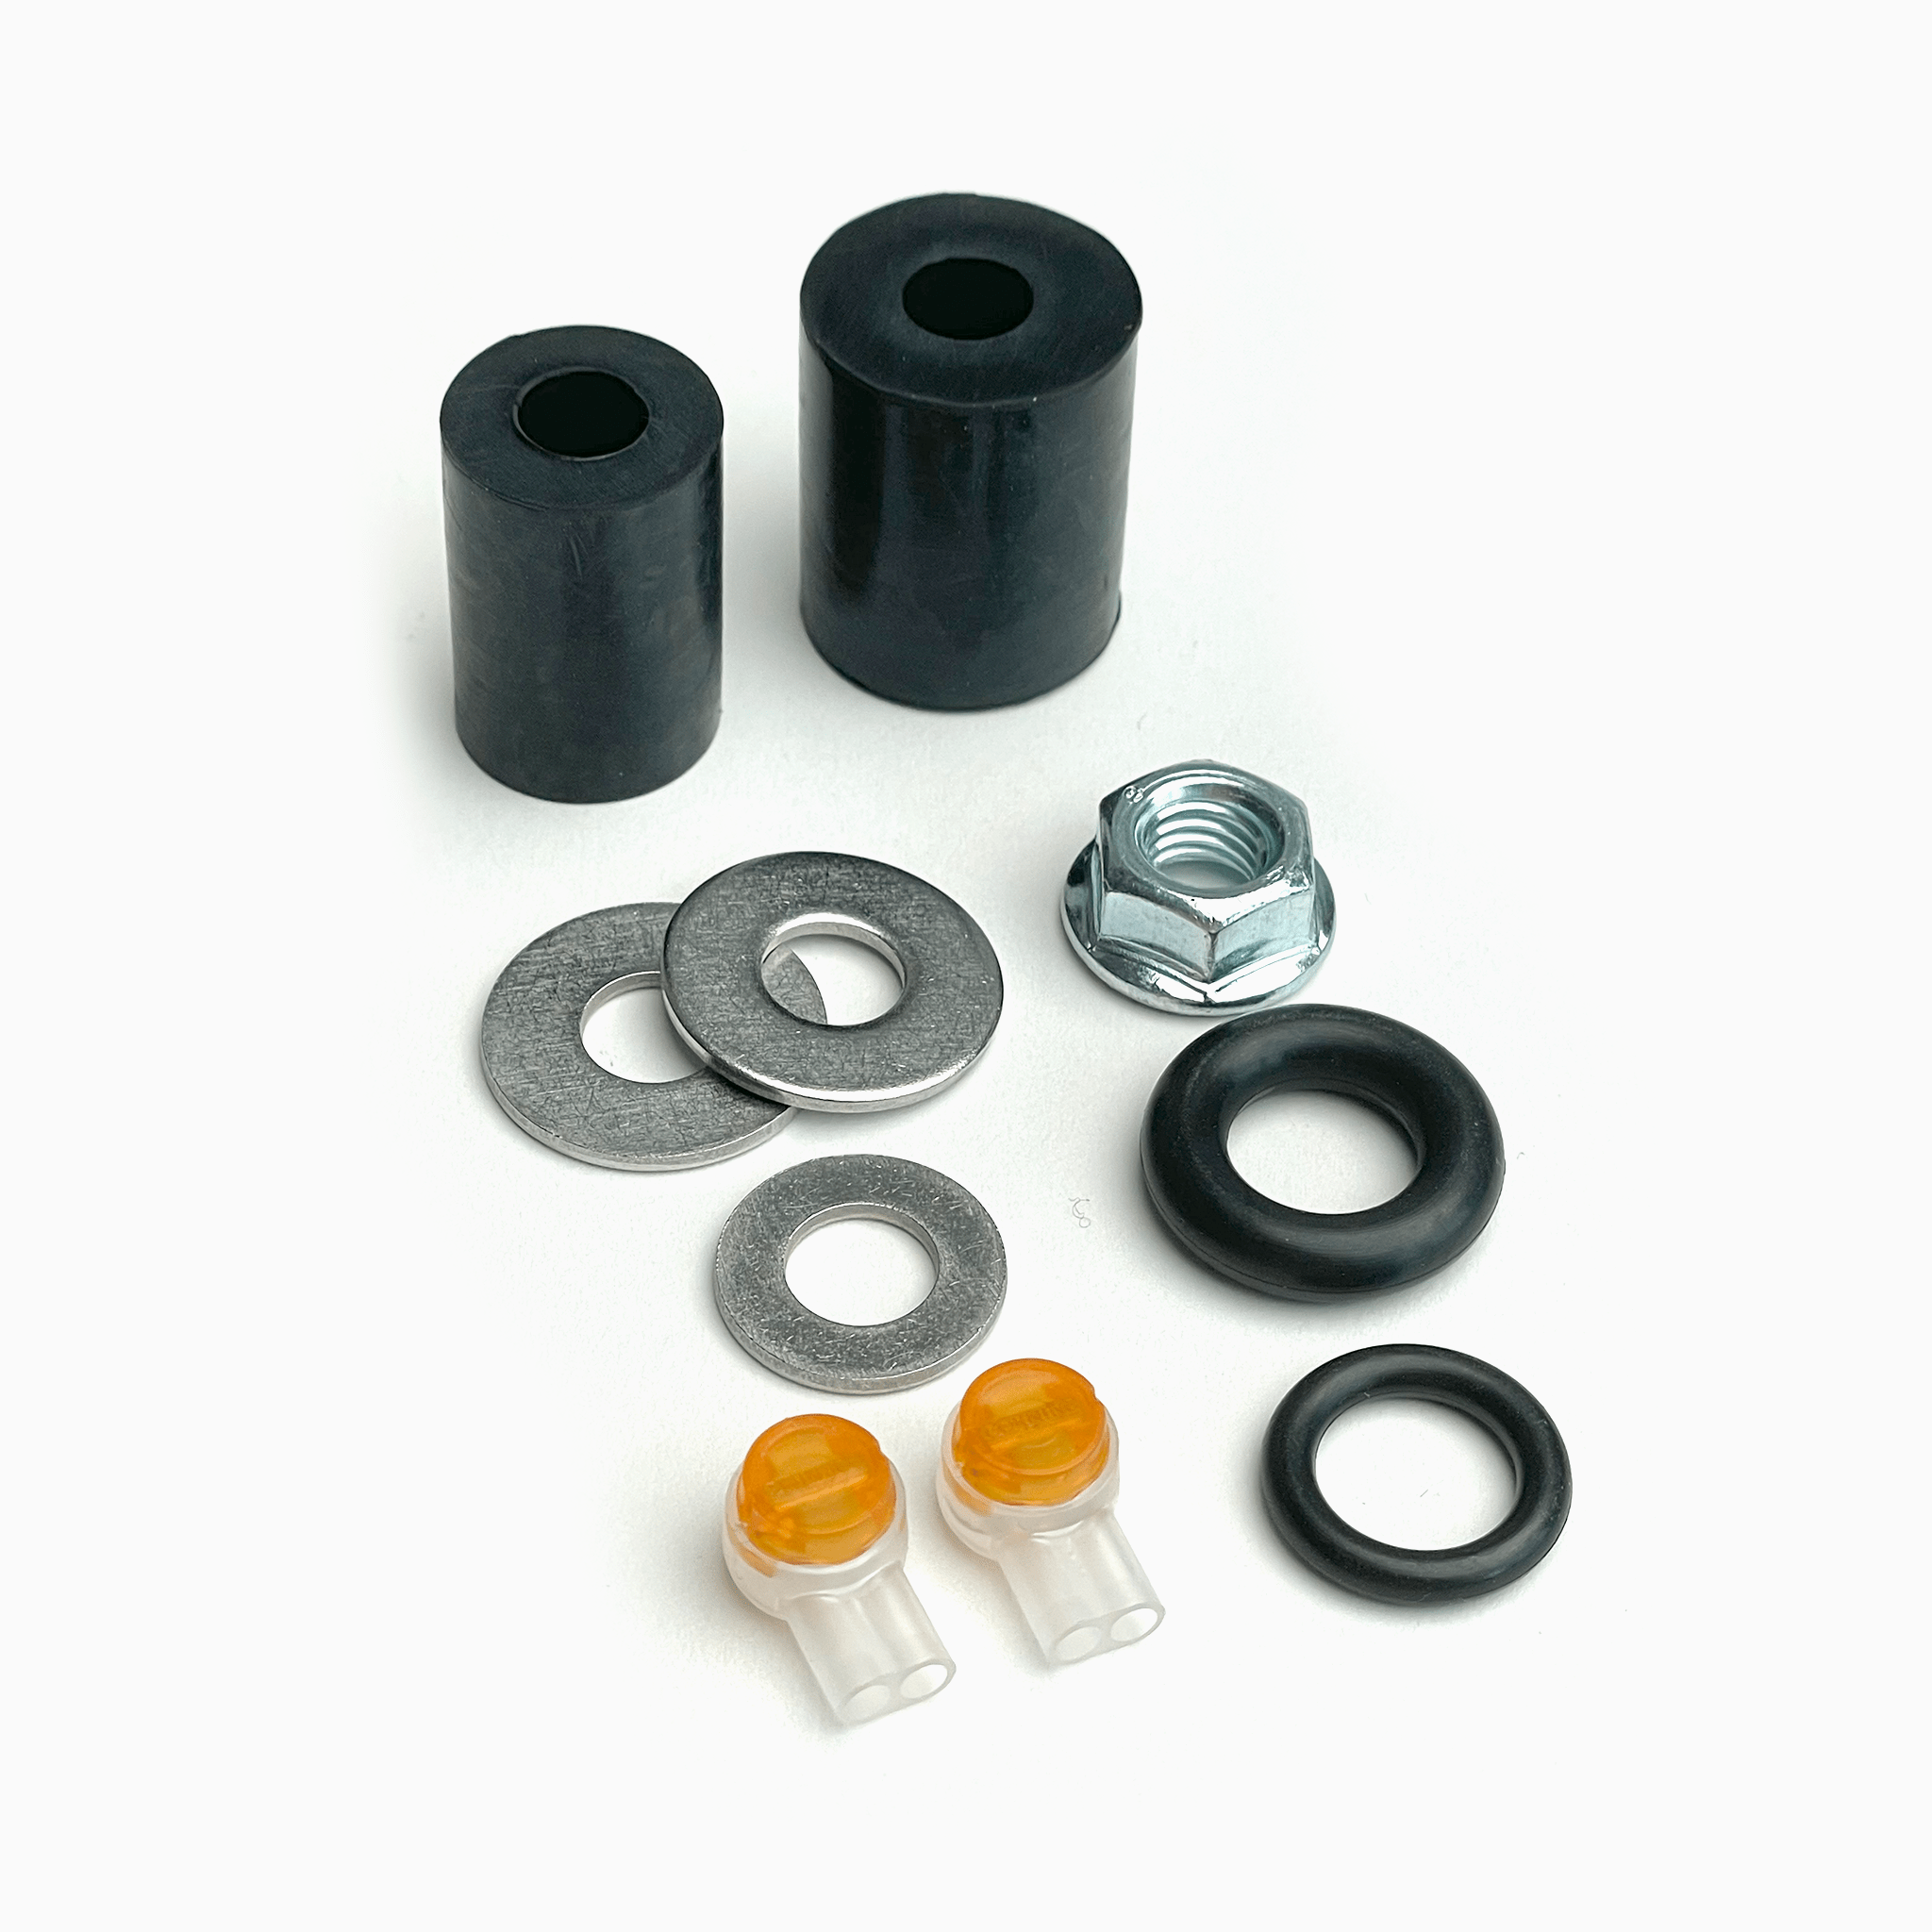 mo.blaze disc / cone - replacement mounting parts